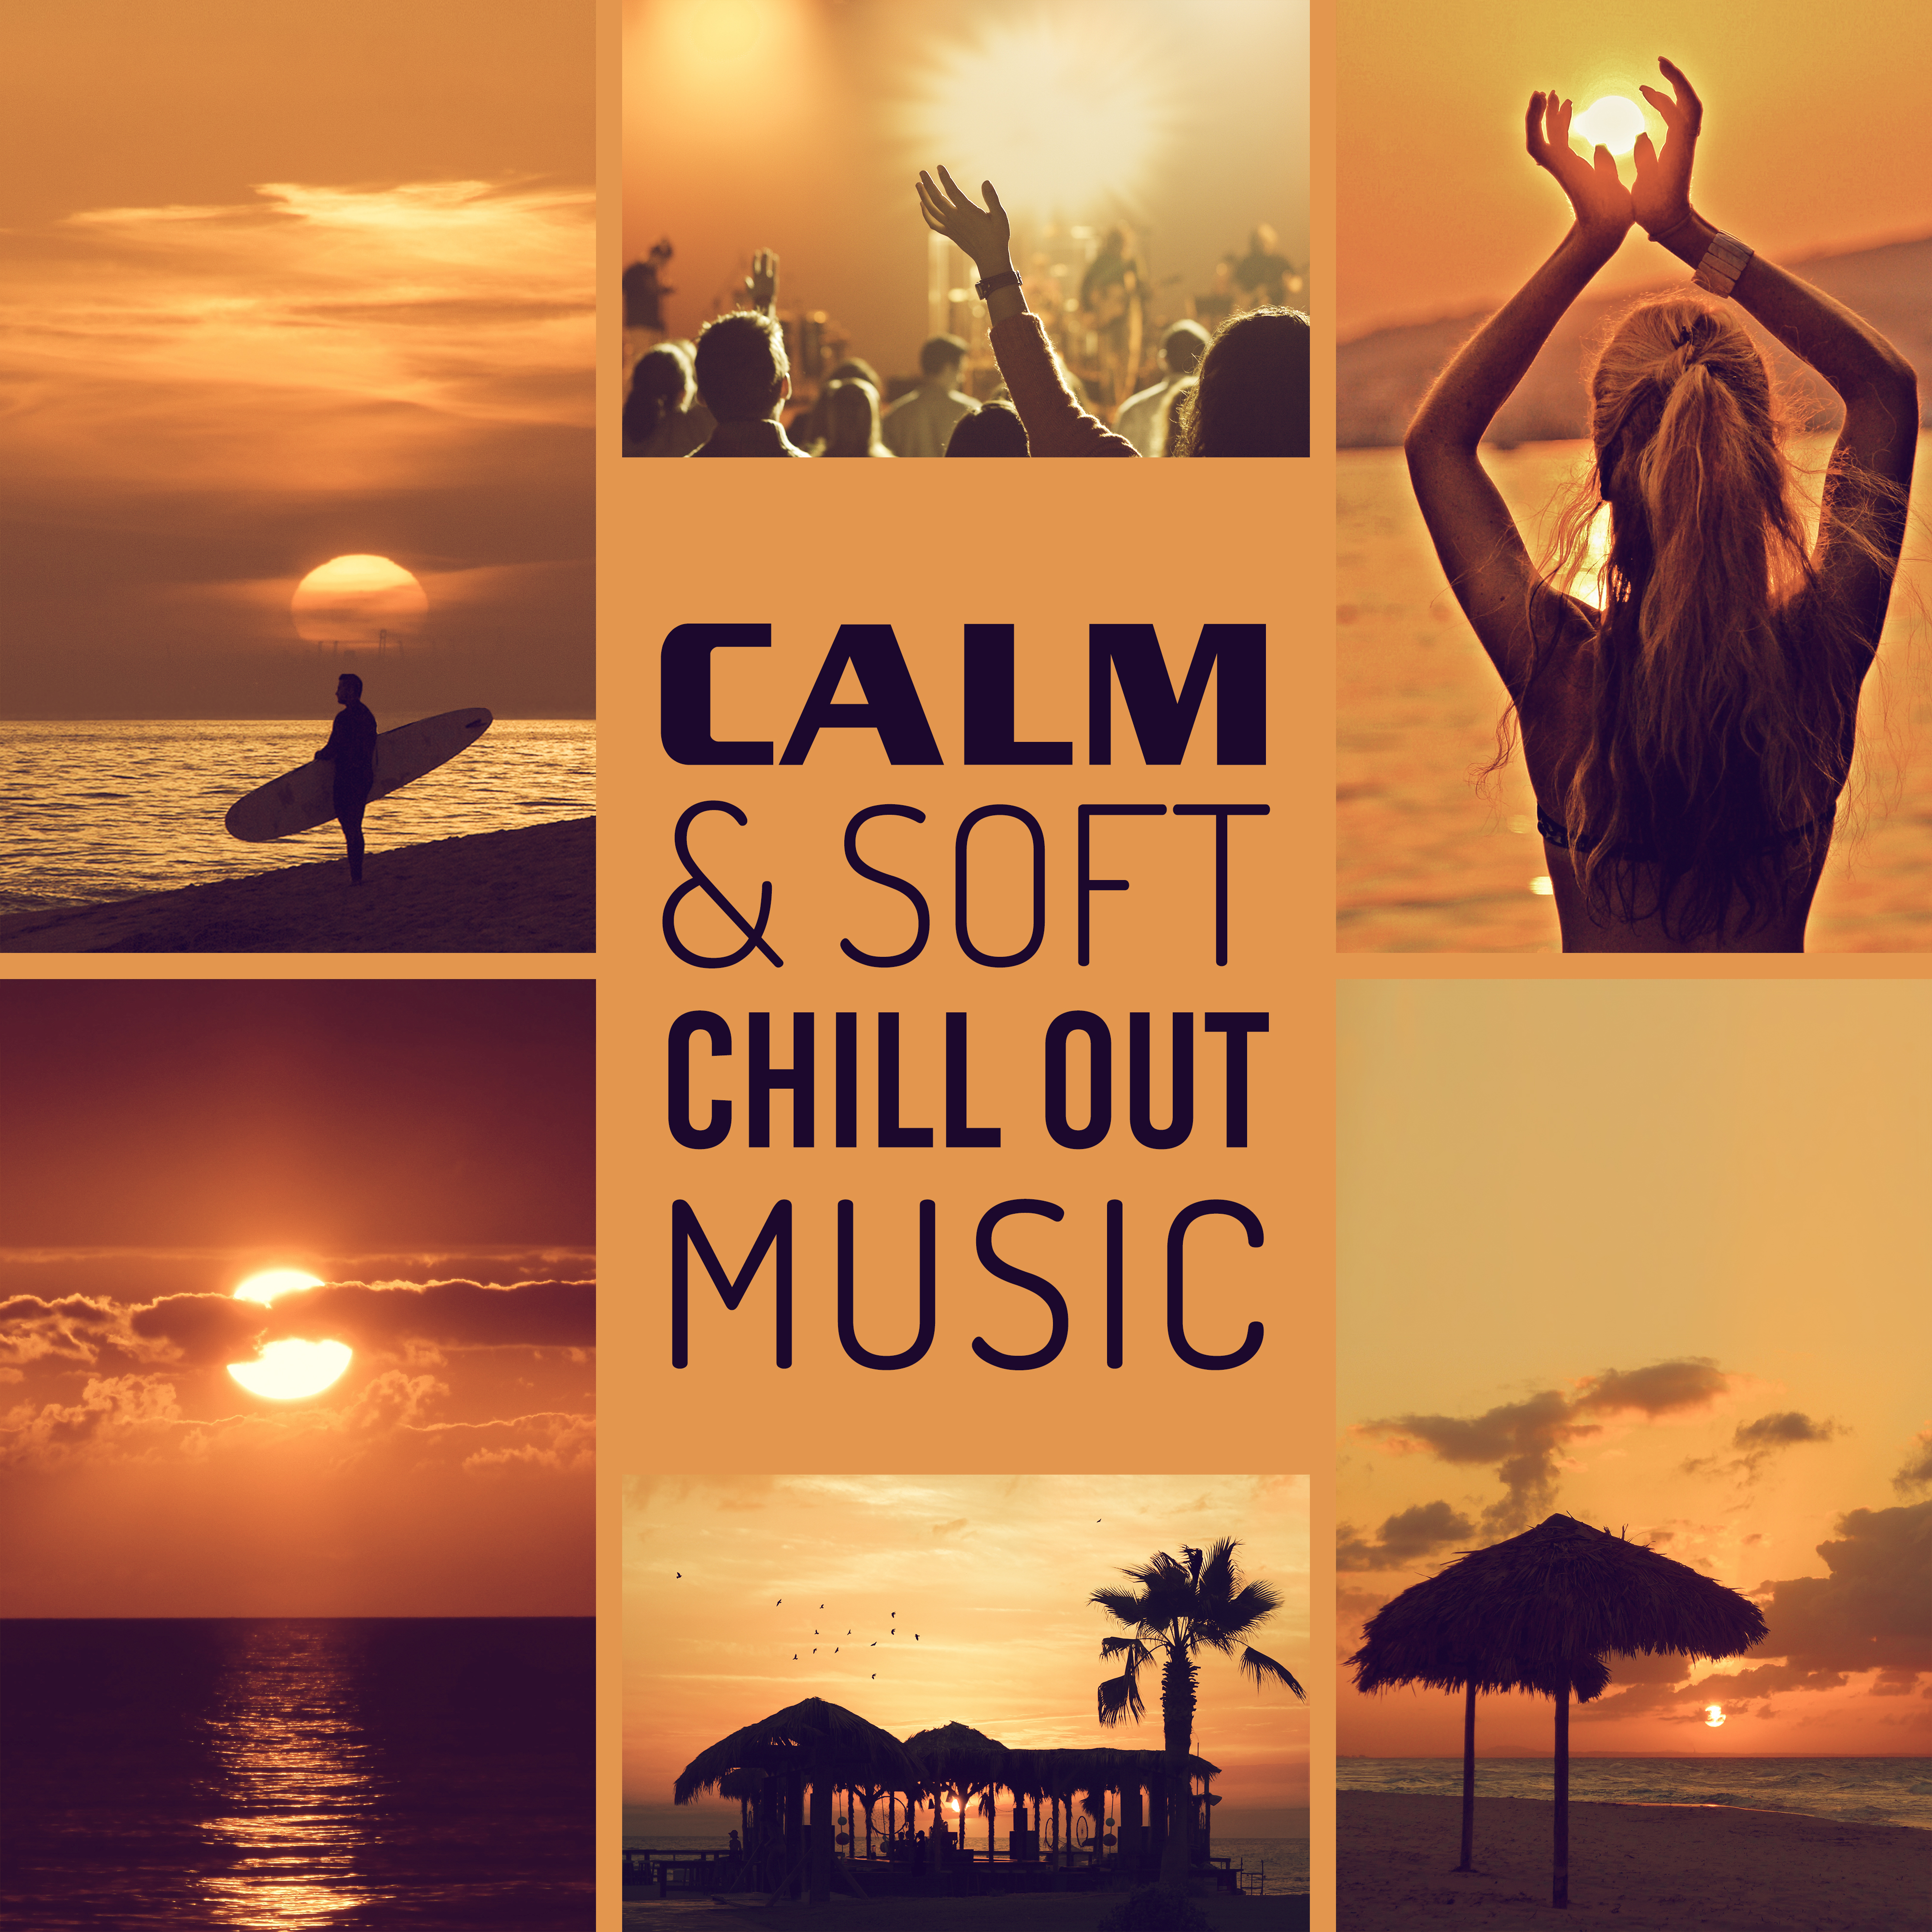 Calm & Soft Chill Out Music – Relax with Chill Out Sounds, Waves of Calmness, Sensual Music